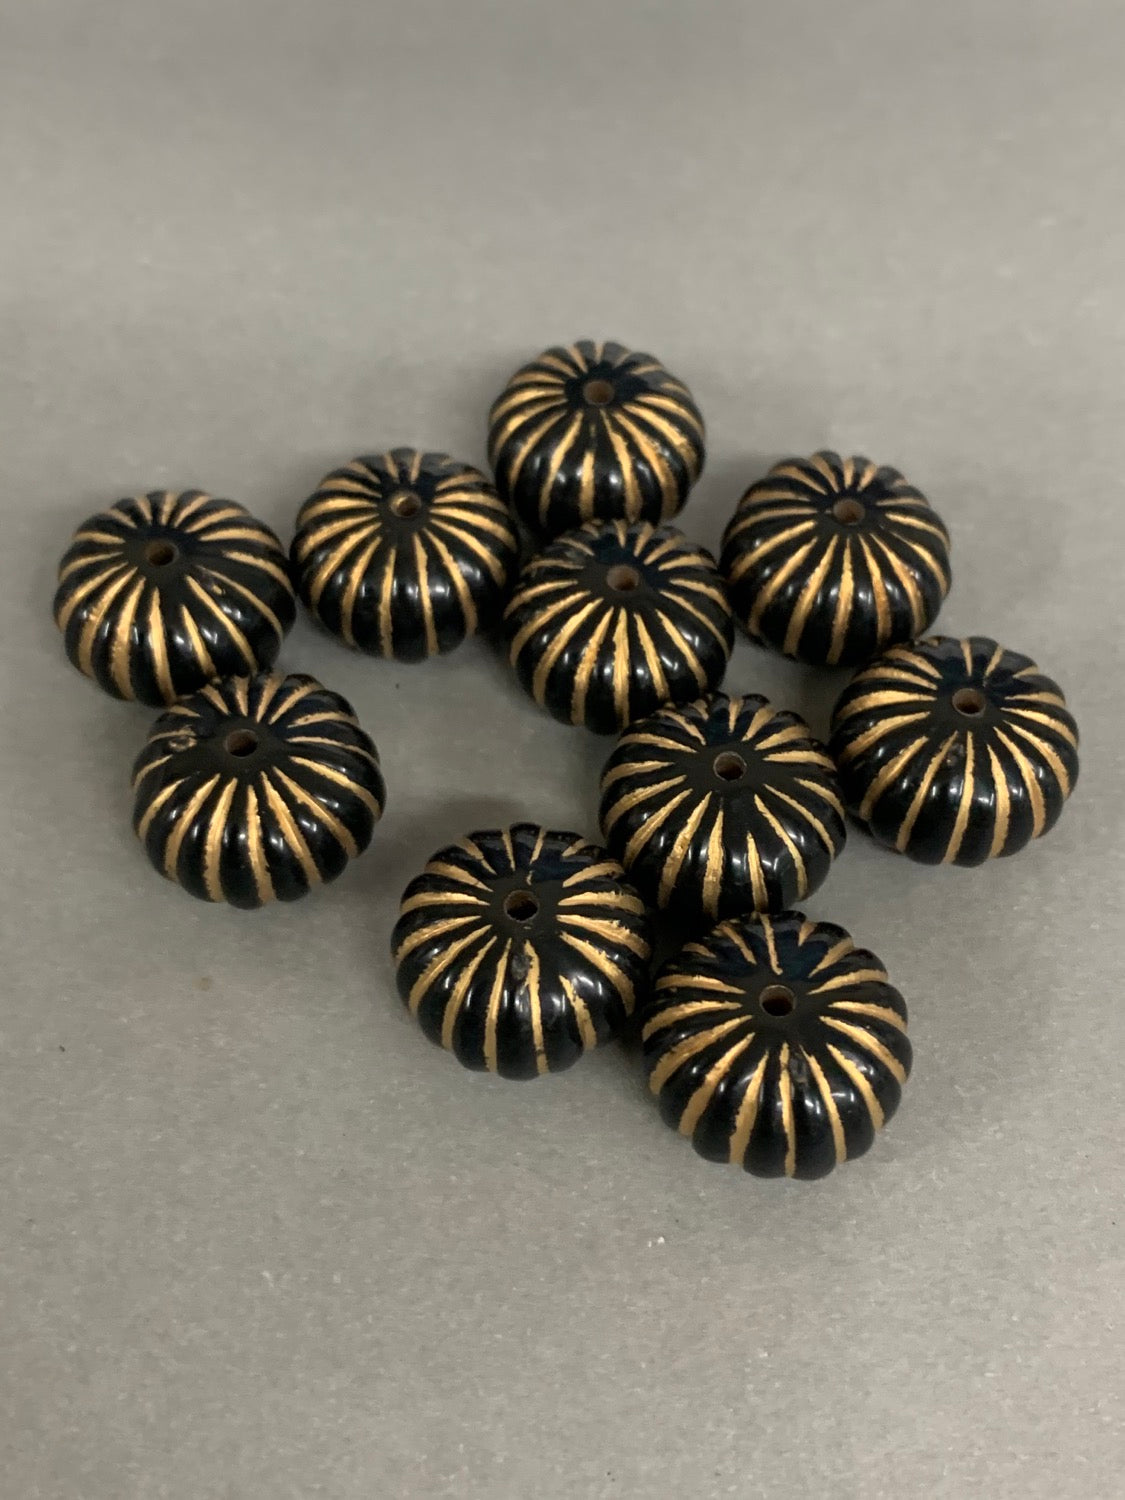 18mm Black and Gold Acrylic Rondelle Qty 10 /14024